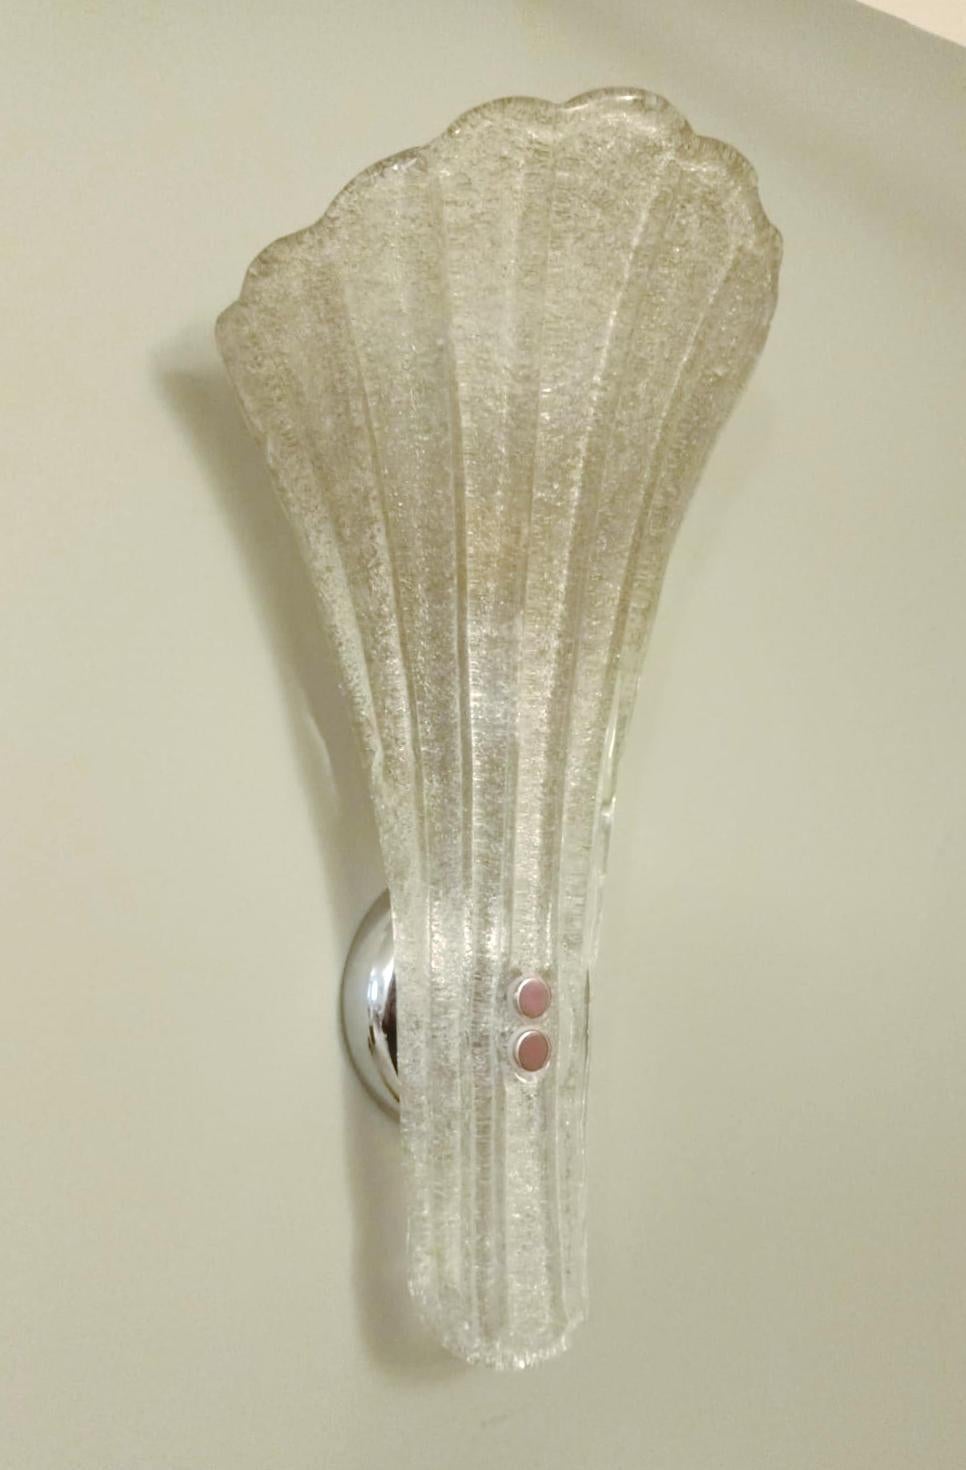 Vintage Italian wall lights with trumpet shaped clear Murano glass shades hand blown with smoky granular using Graniglia technique, mounted on chrome finish frames / made in Italy circa 1960s
Measures: height 18 inches, width 9 inches, depth 7